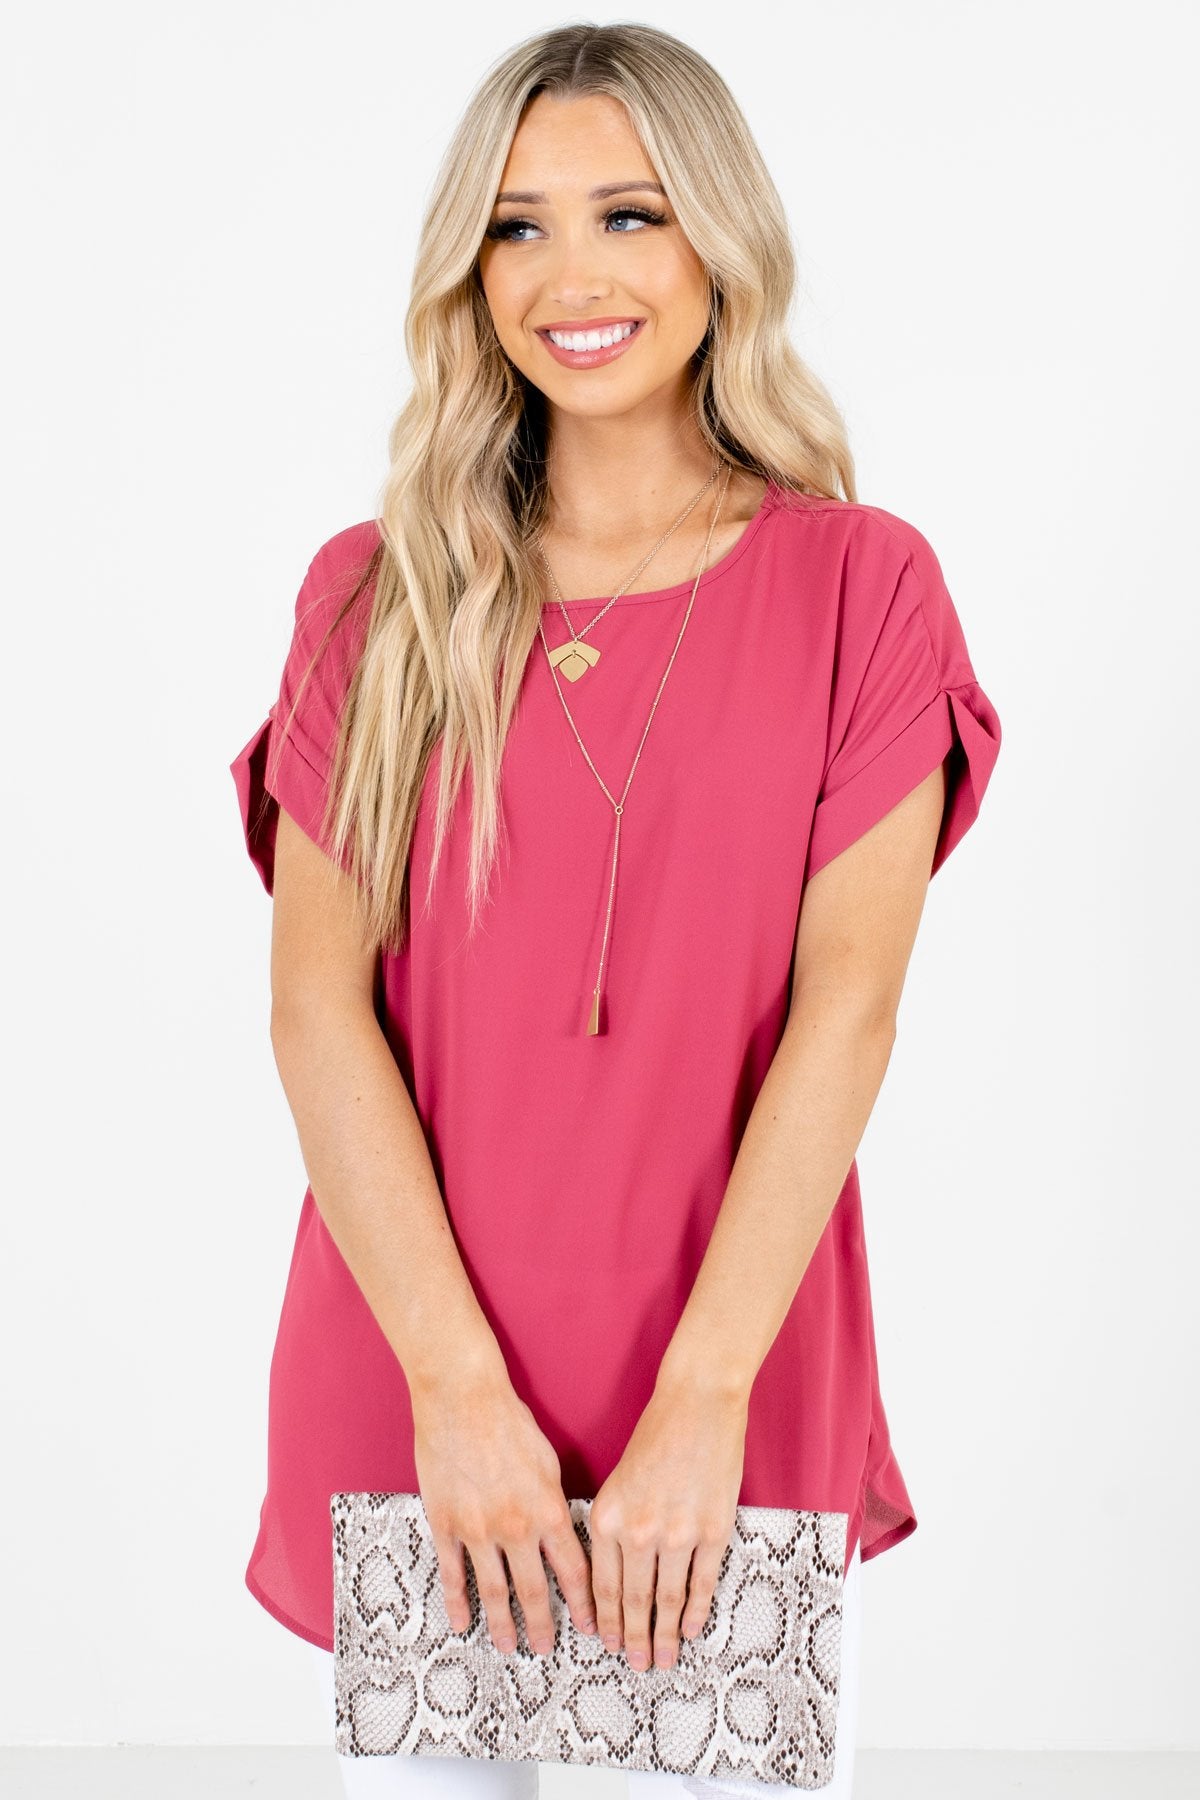 Rose Pink Lightweight and Flowy Boutique Blouses for Women